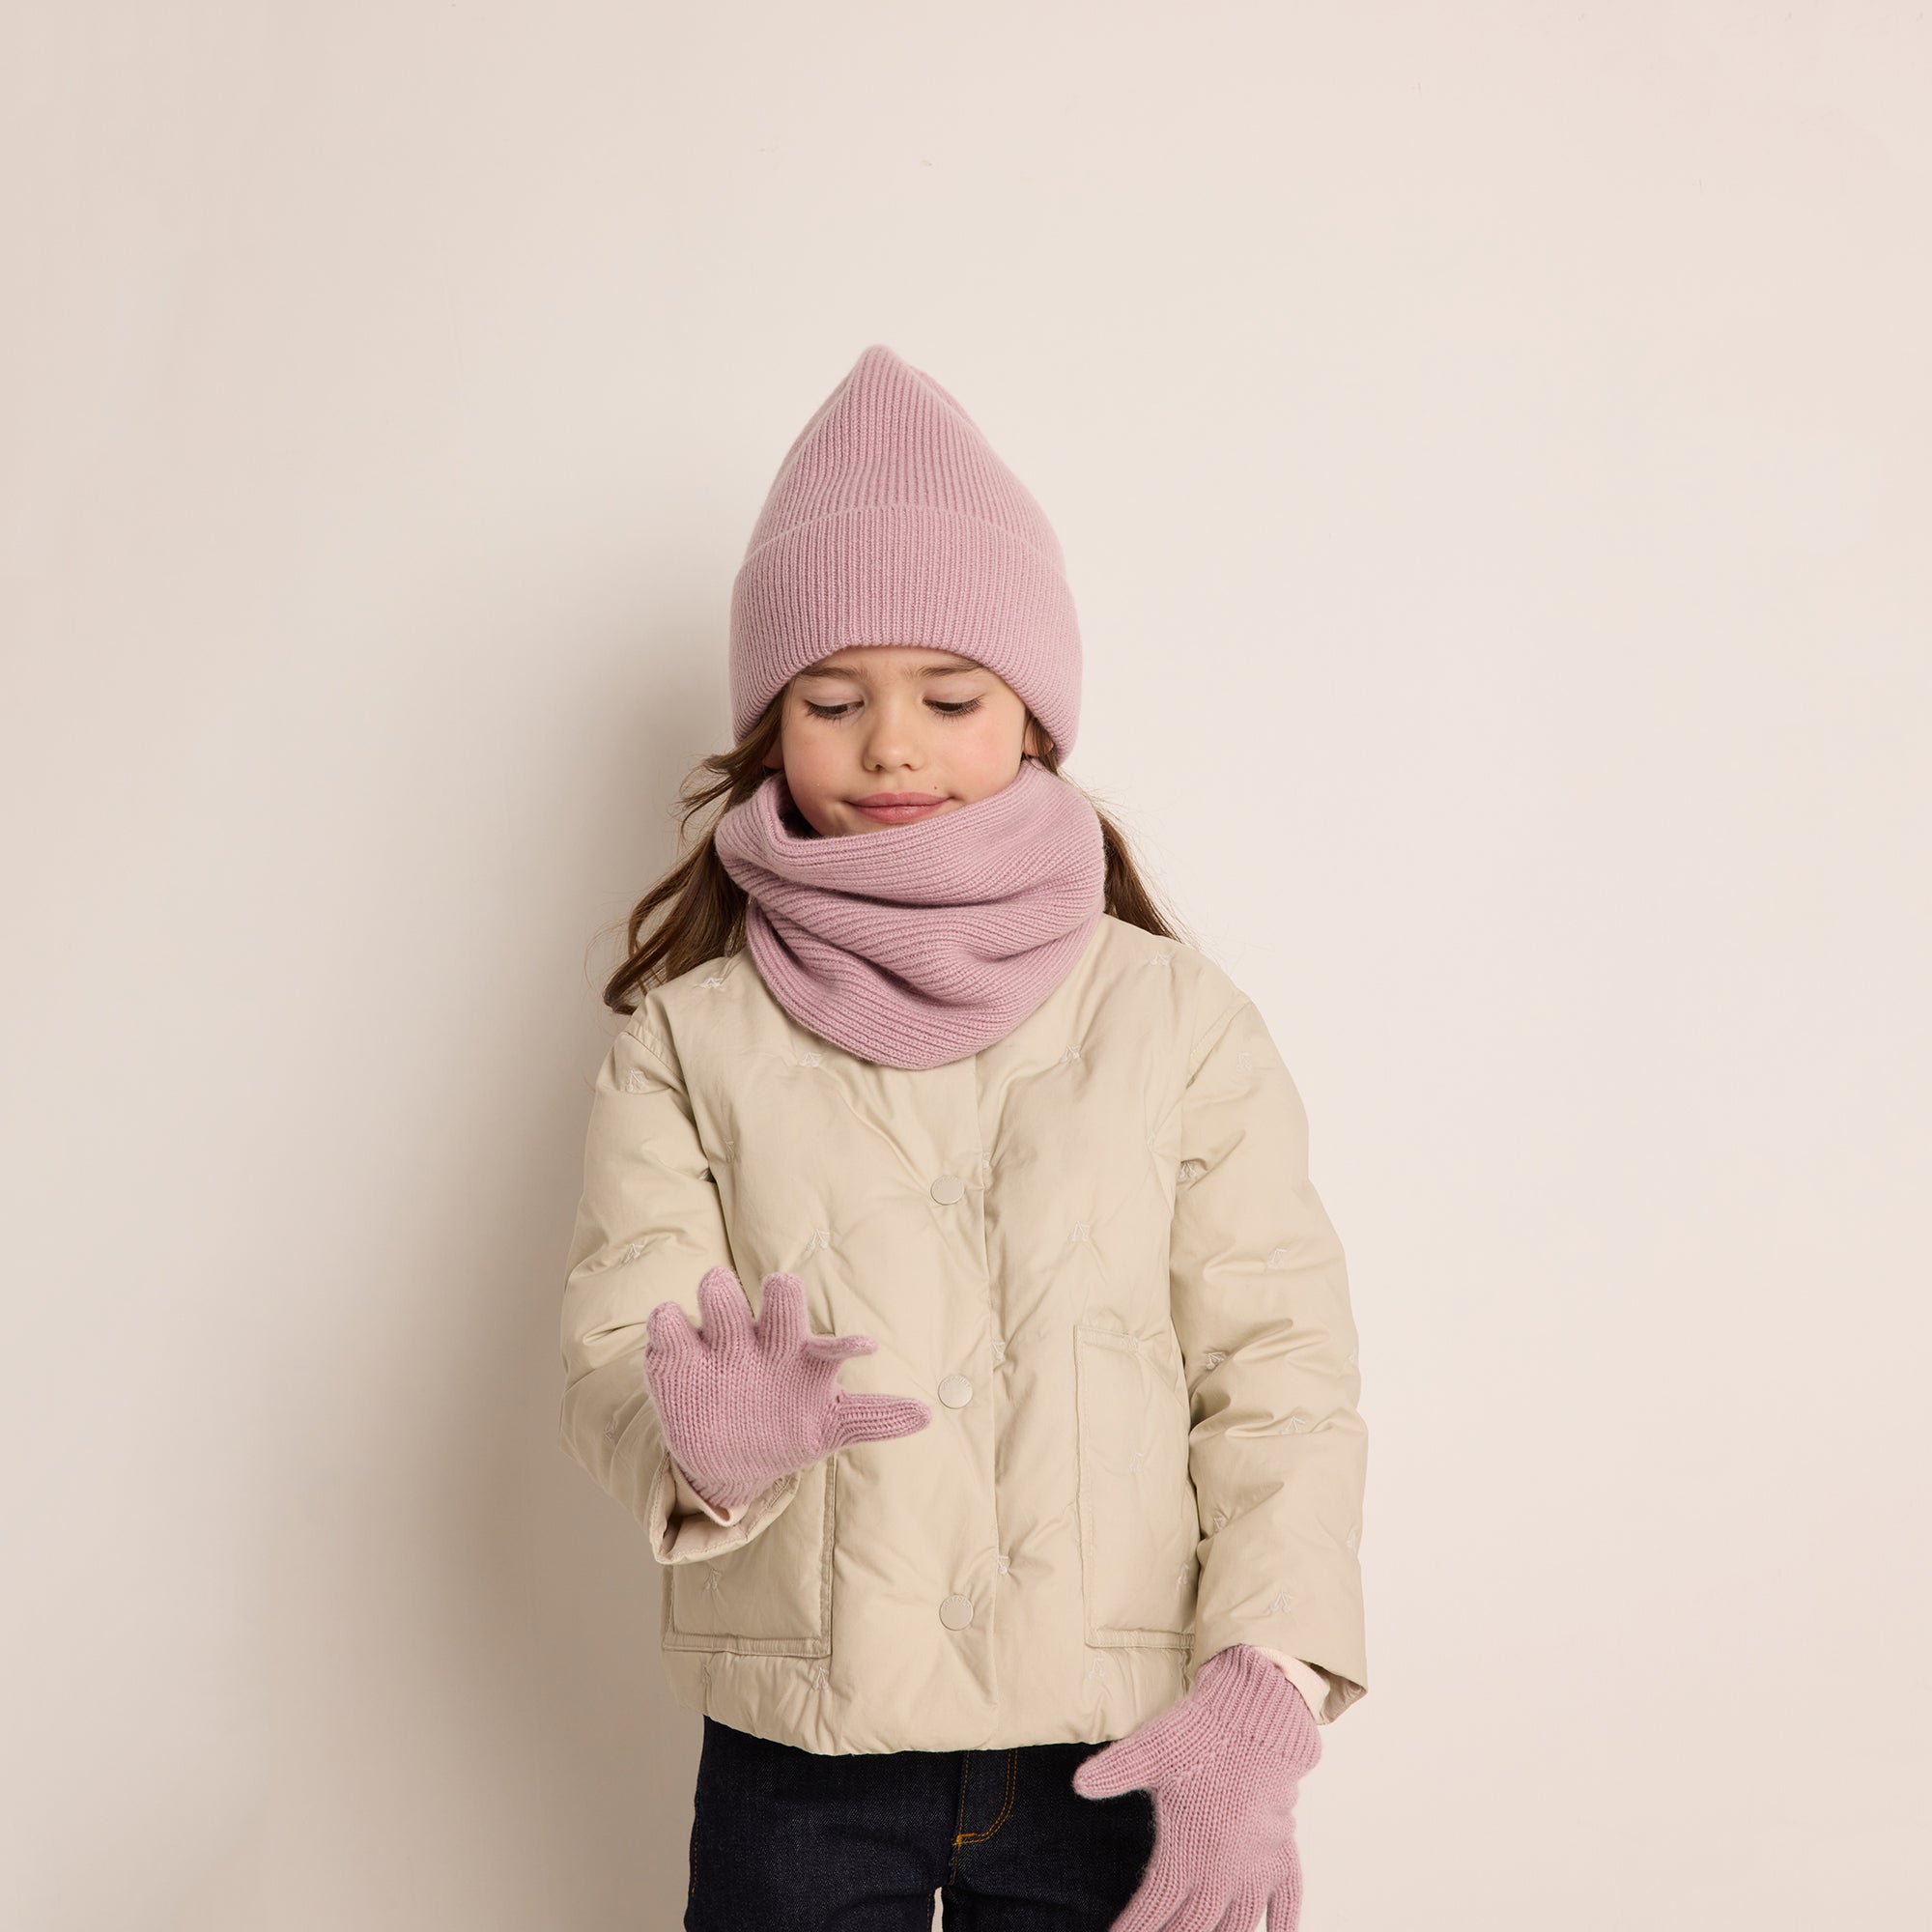 Girls Lilac Cashmere Hat